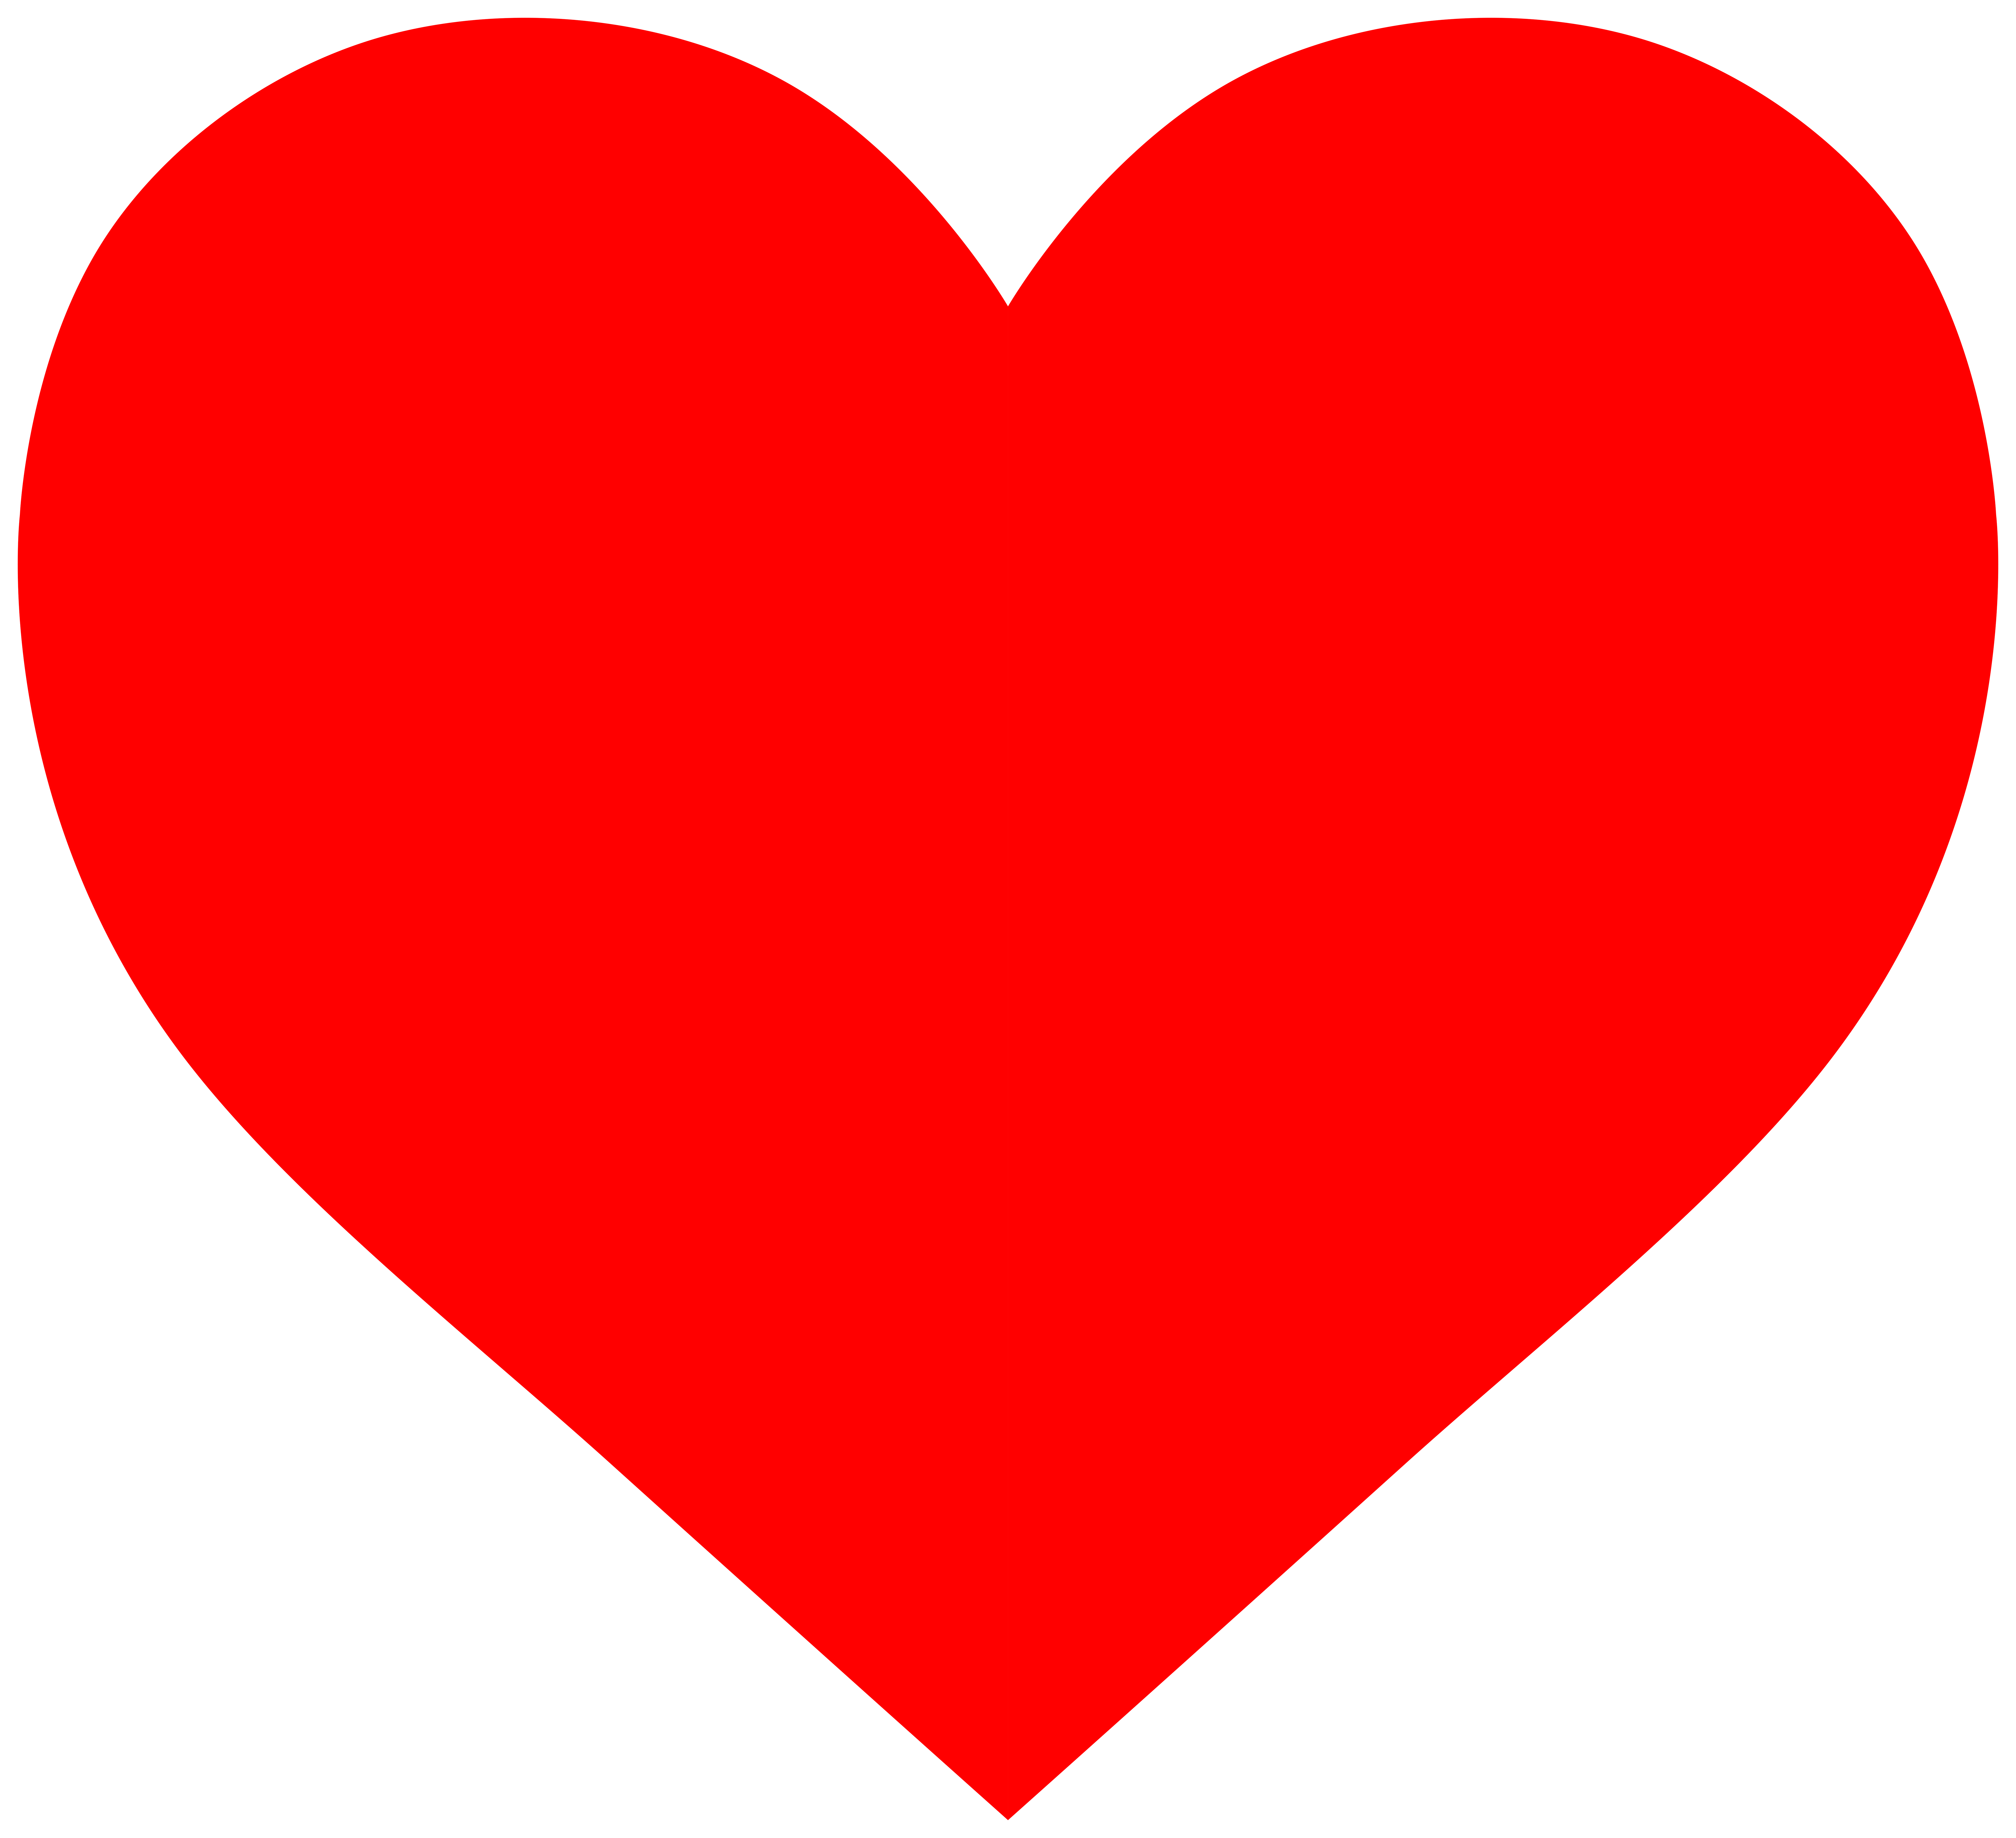 Heart png images